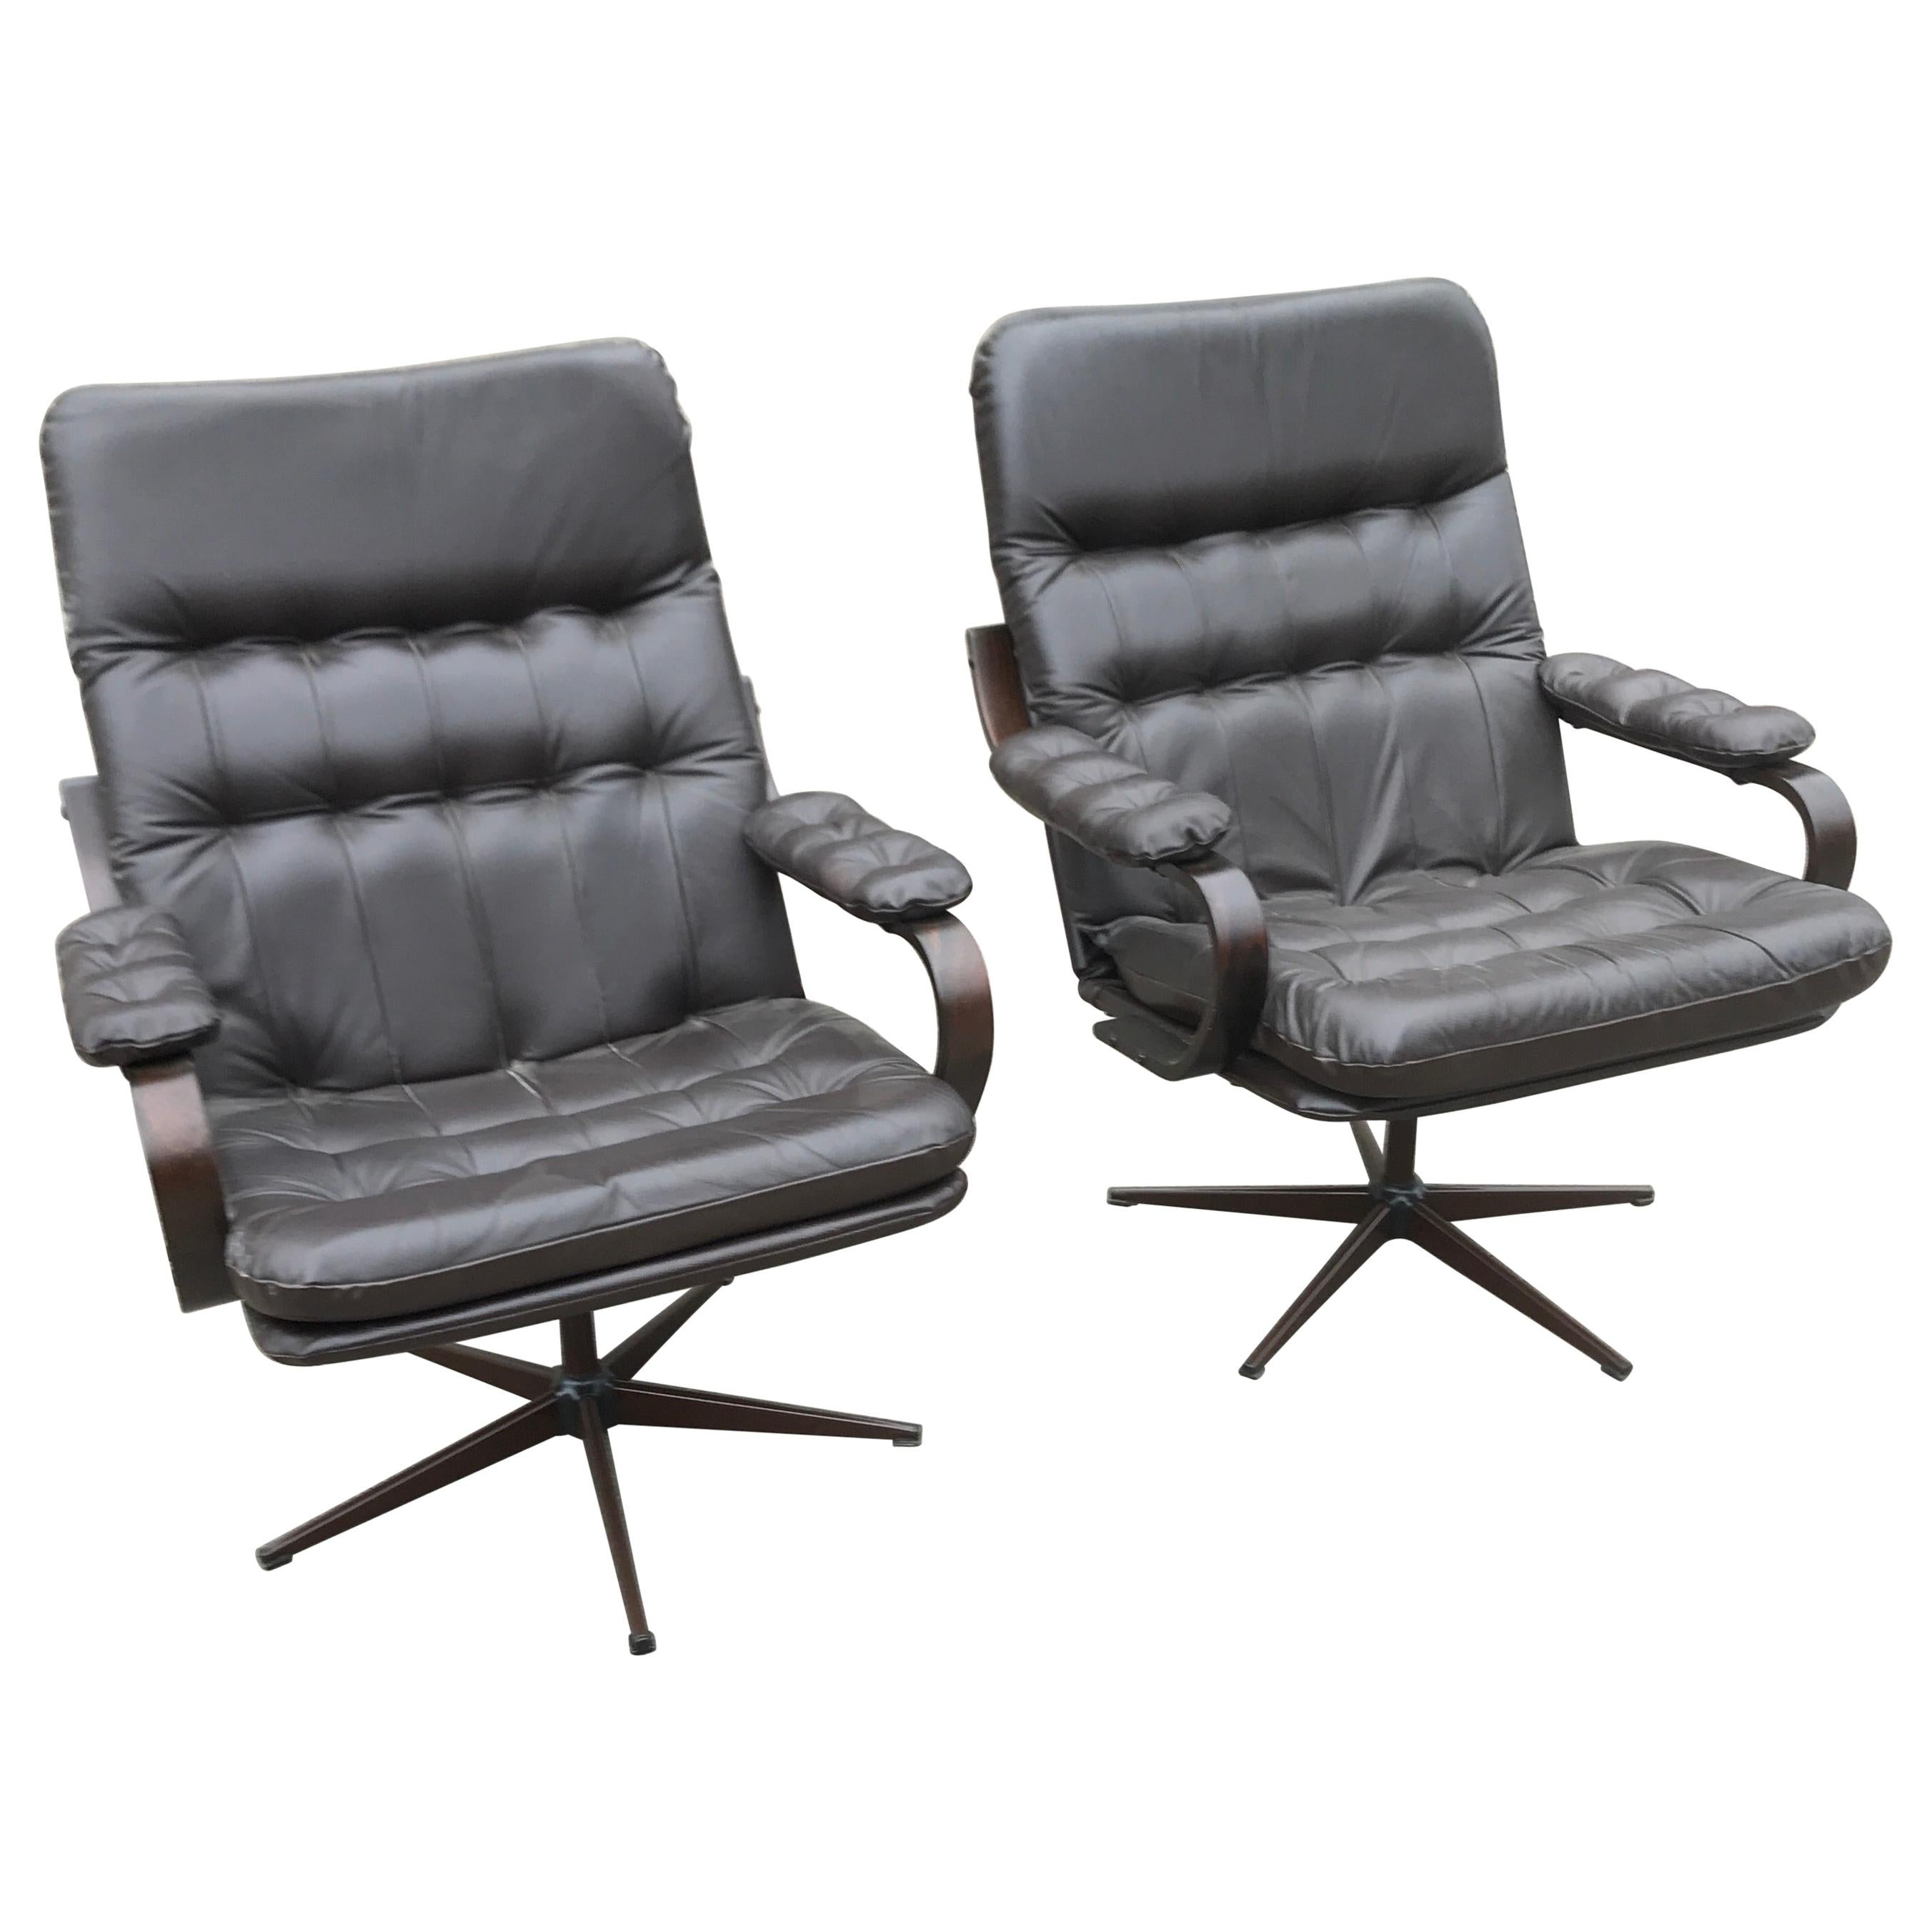 Pair of 1970s Classic Lounge Chairs